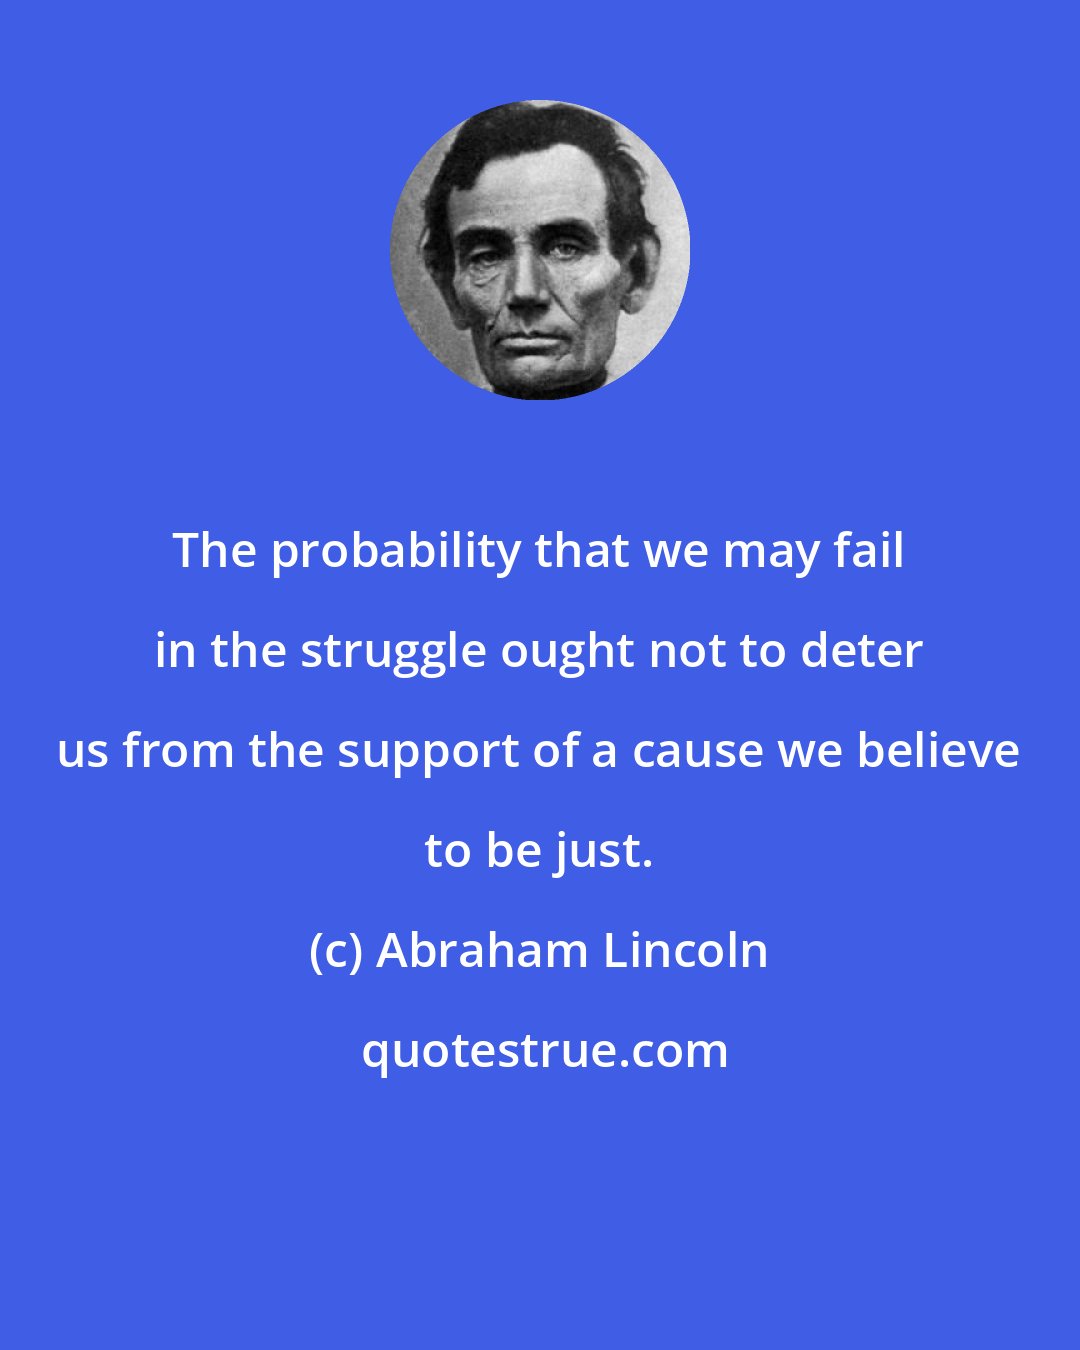 Abraham Lincoln: The probability that we may fail in the struggle ought not to deter us from the support of a cause we believe to be just.